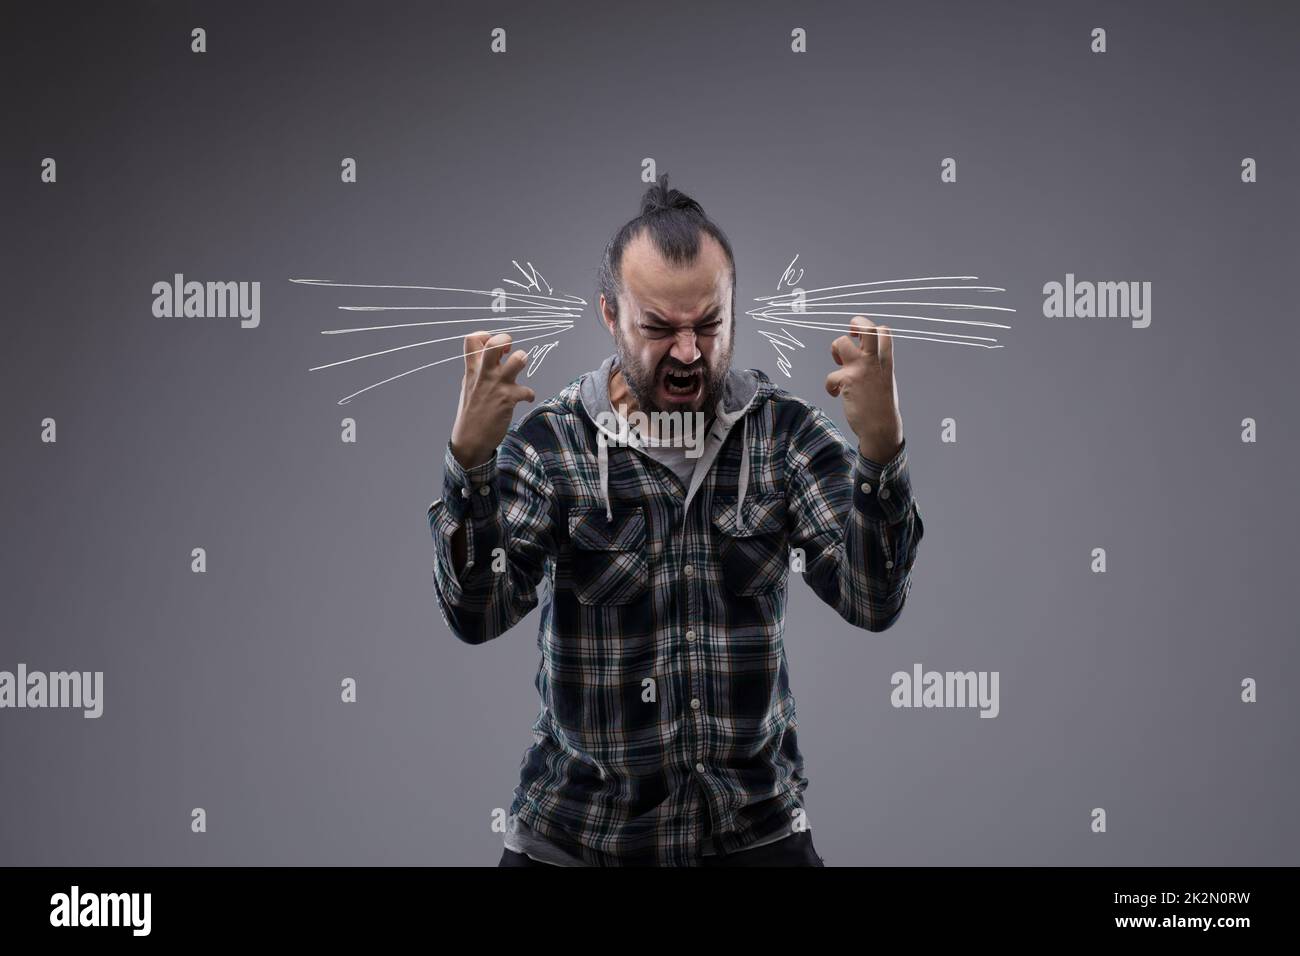 Angry man screaming and throwing a temper tantrum Stock Photo